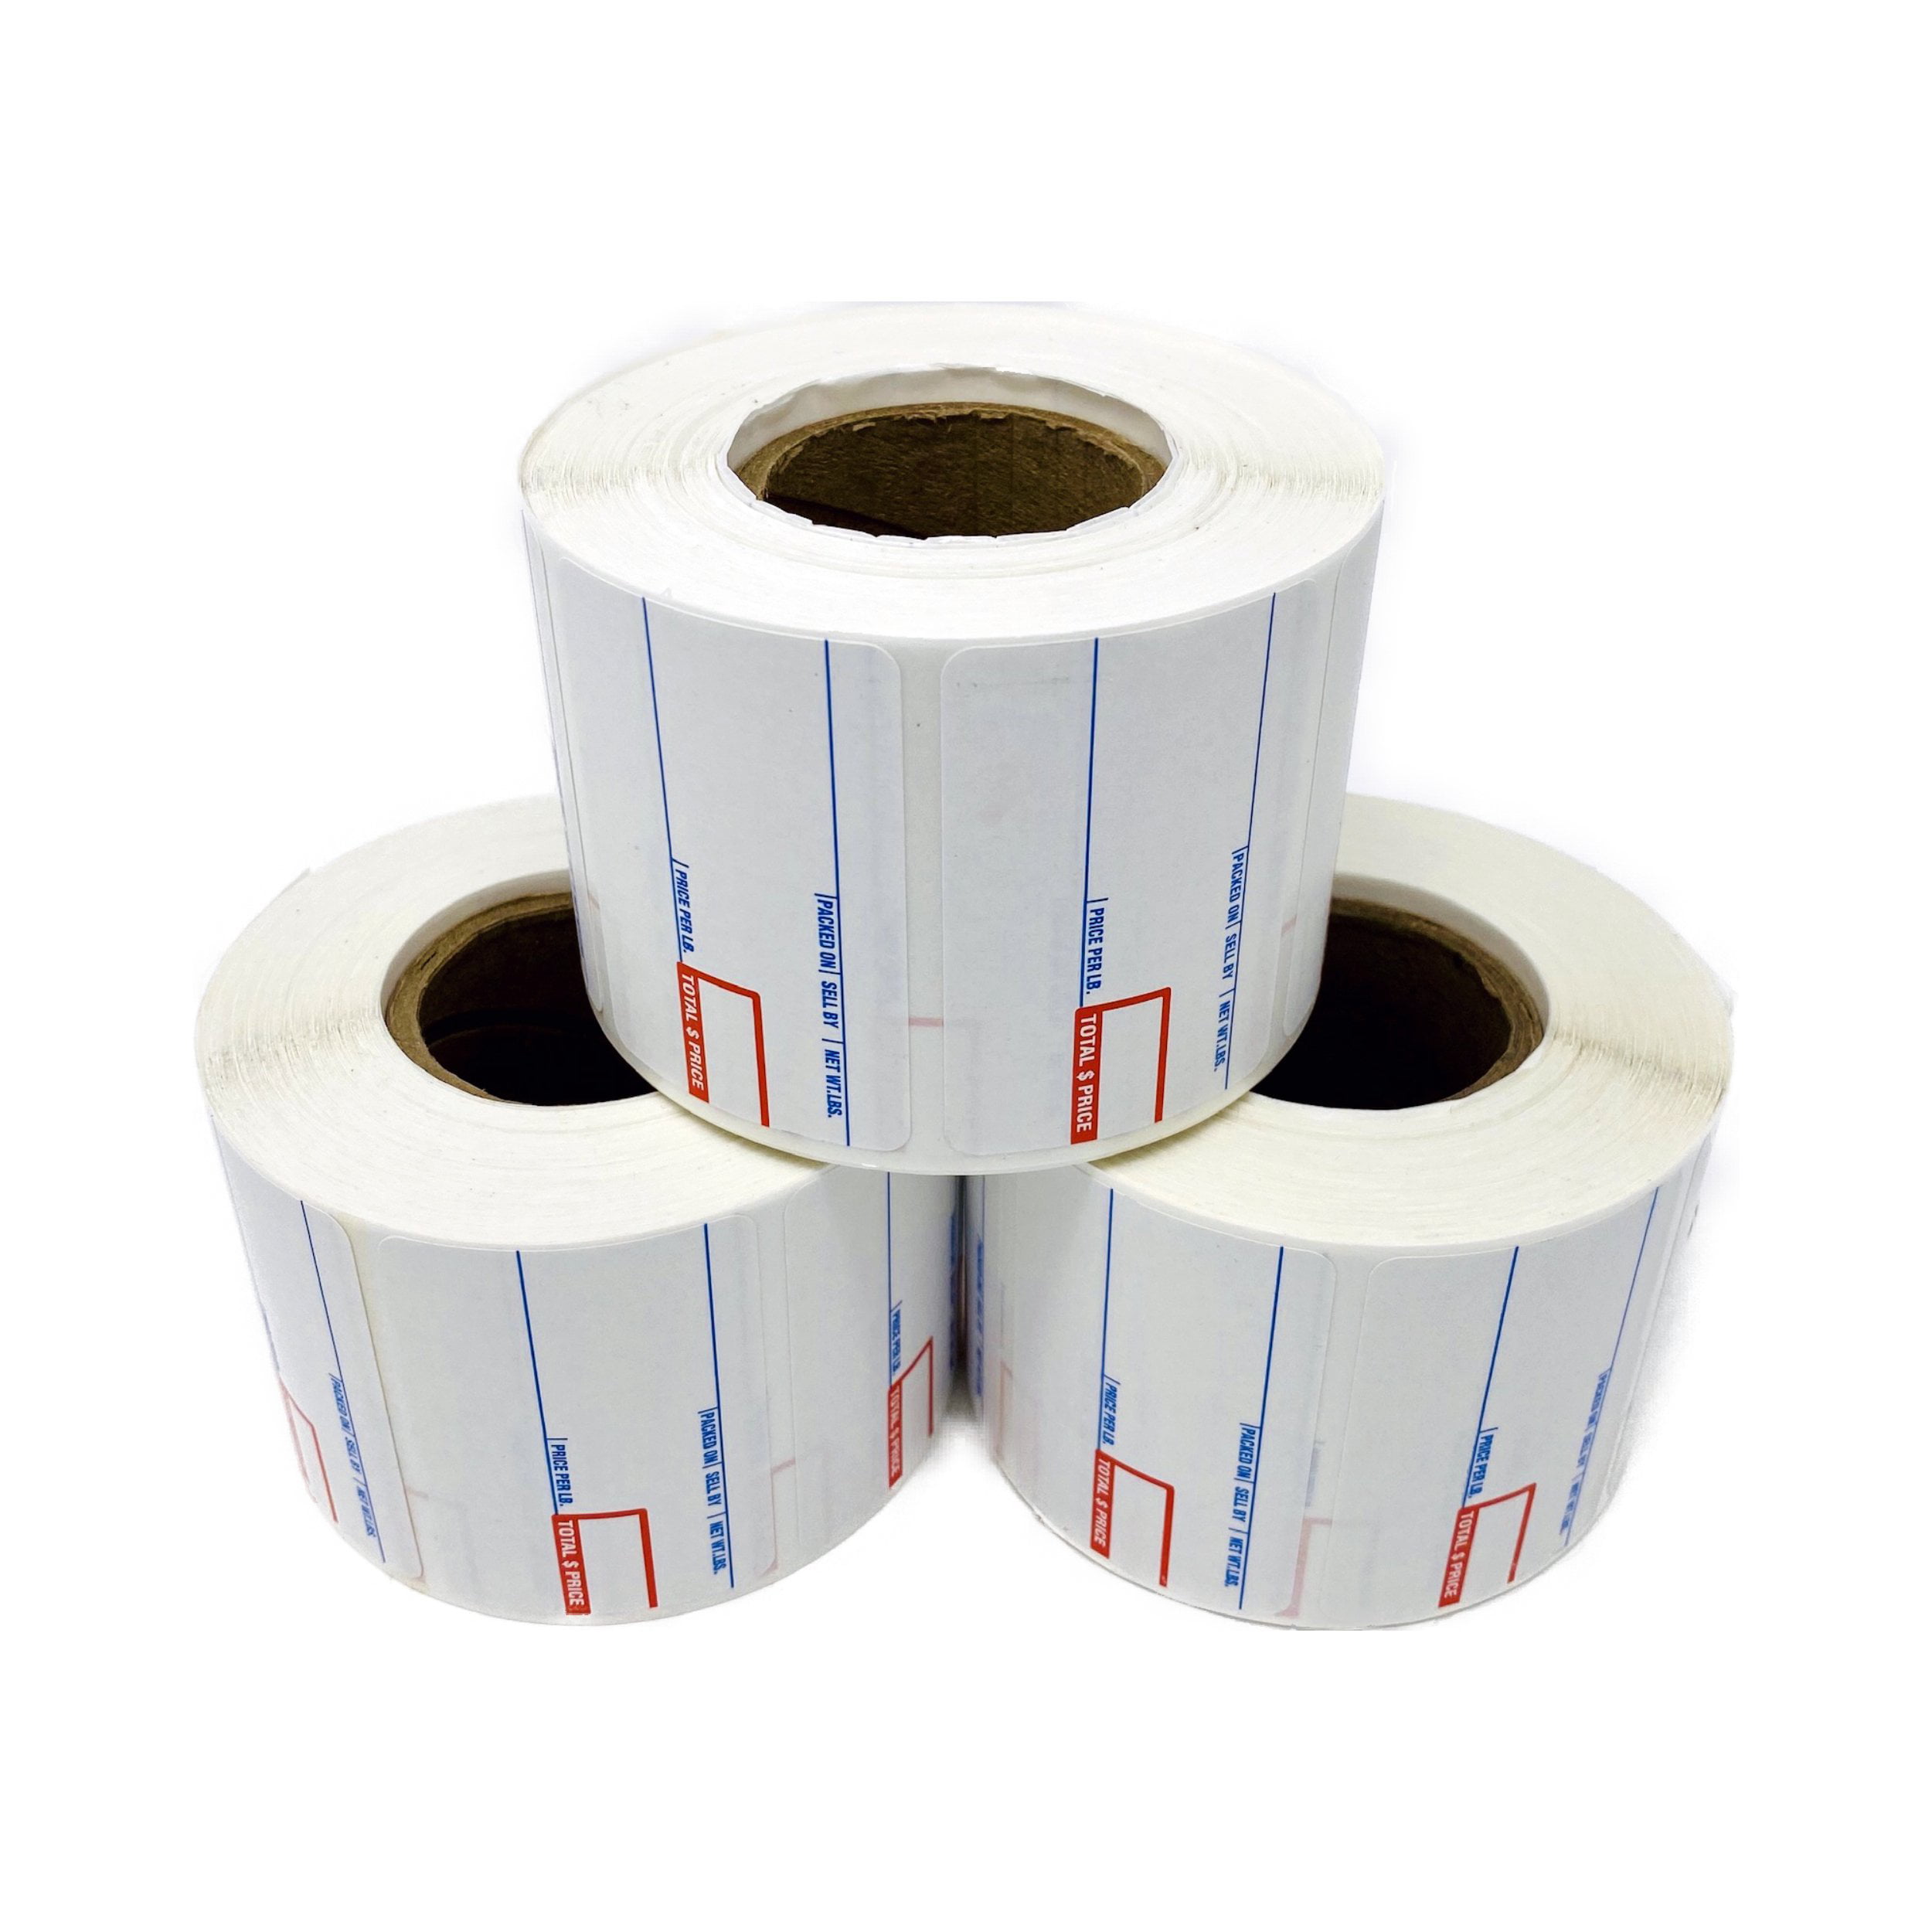 58mm x 40mm 700 CAS LP-1000 UPC Weigh Scale Labels White With red/Blue Imprint